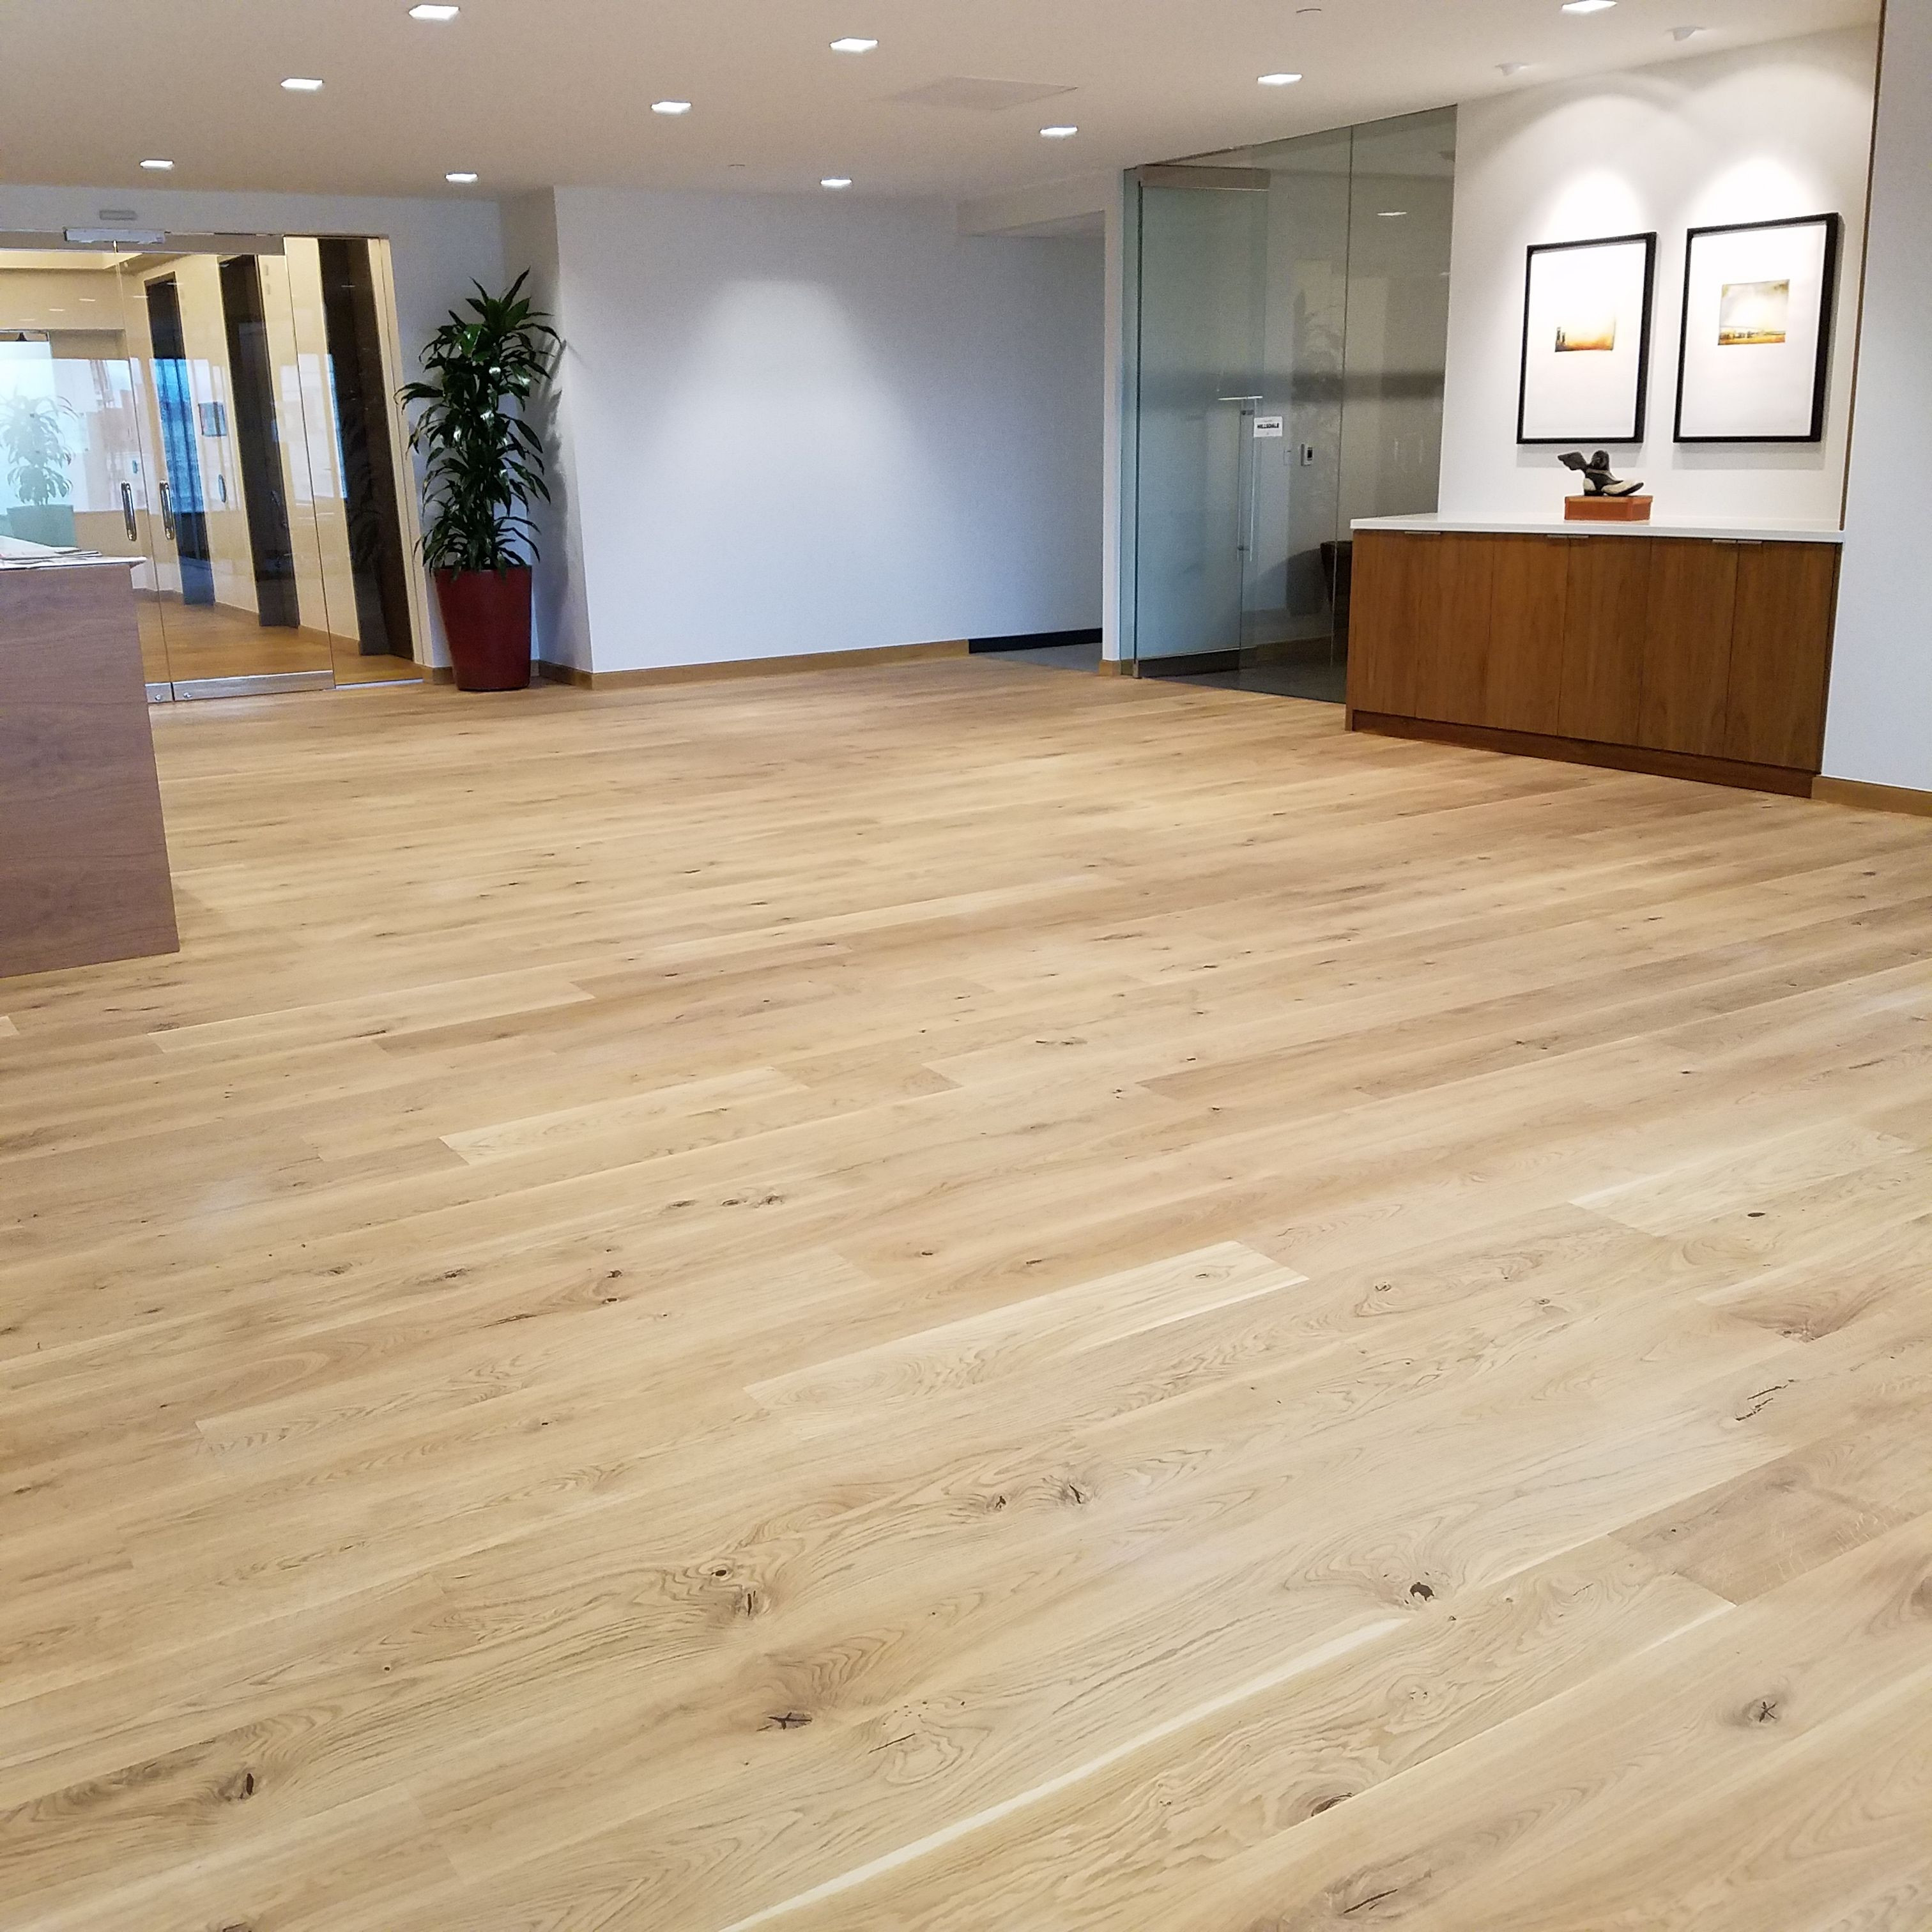 17 Cute Sanding Finishing Hardwood Floors 2024 free download sanding finishing hardwood floors of castlebespokeflooring gracing this modern looking office space be with regard to be it for a professional office space or a residence these 8 wide hardwo